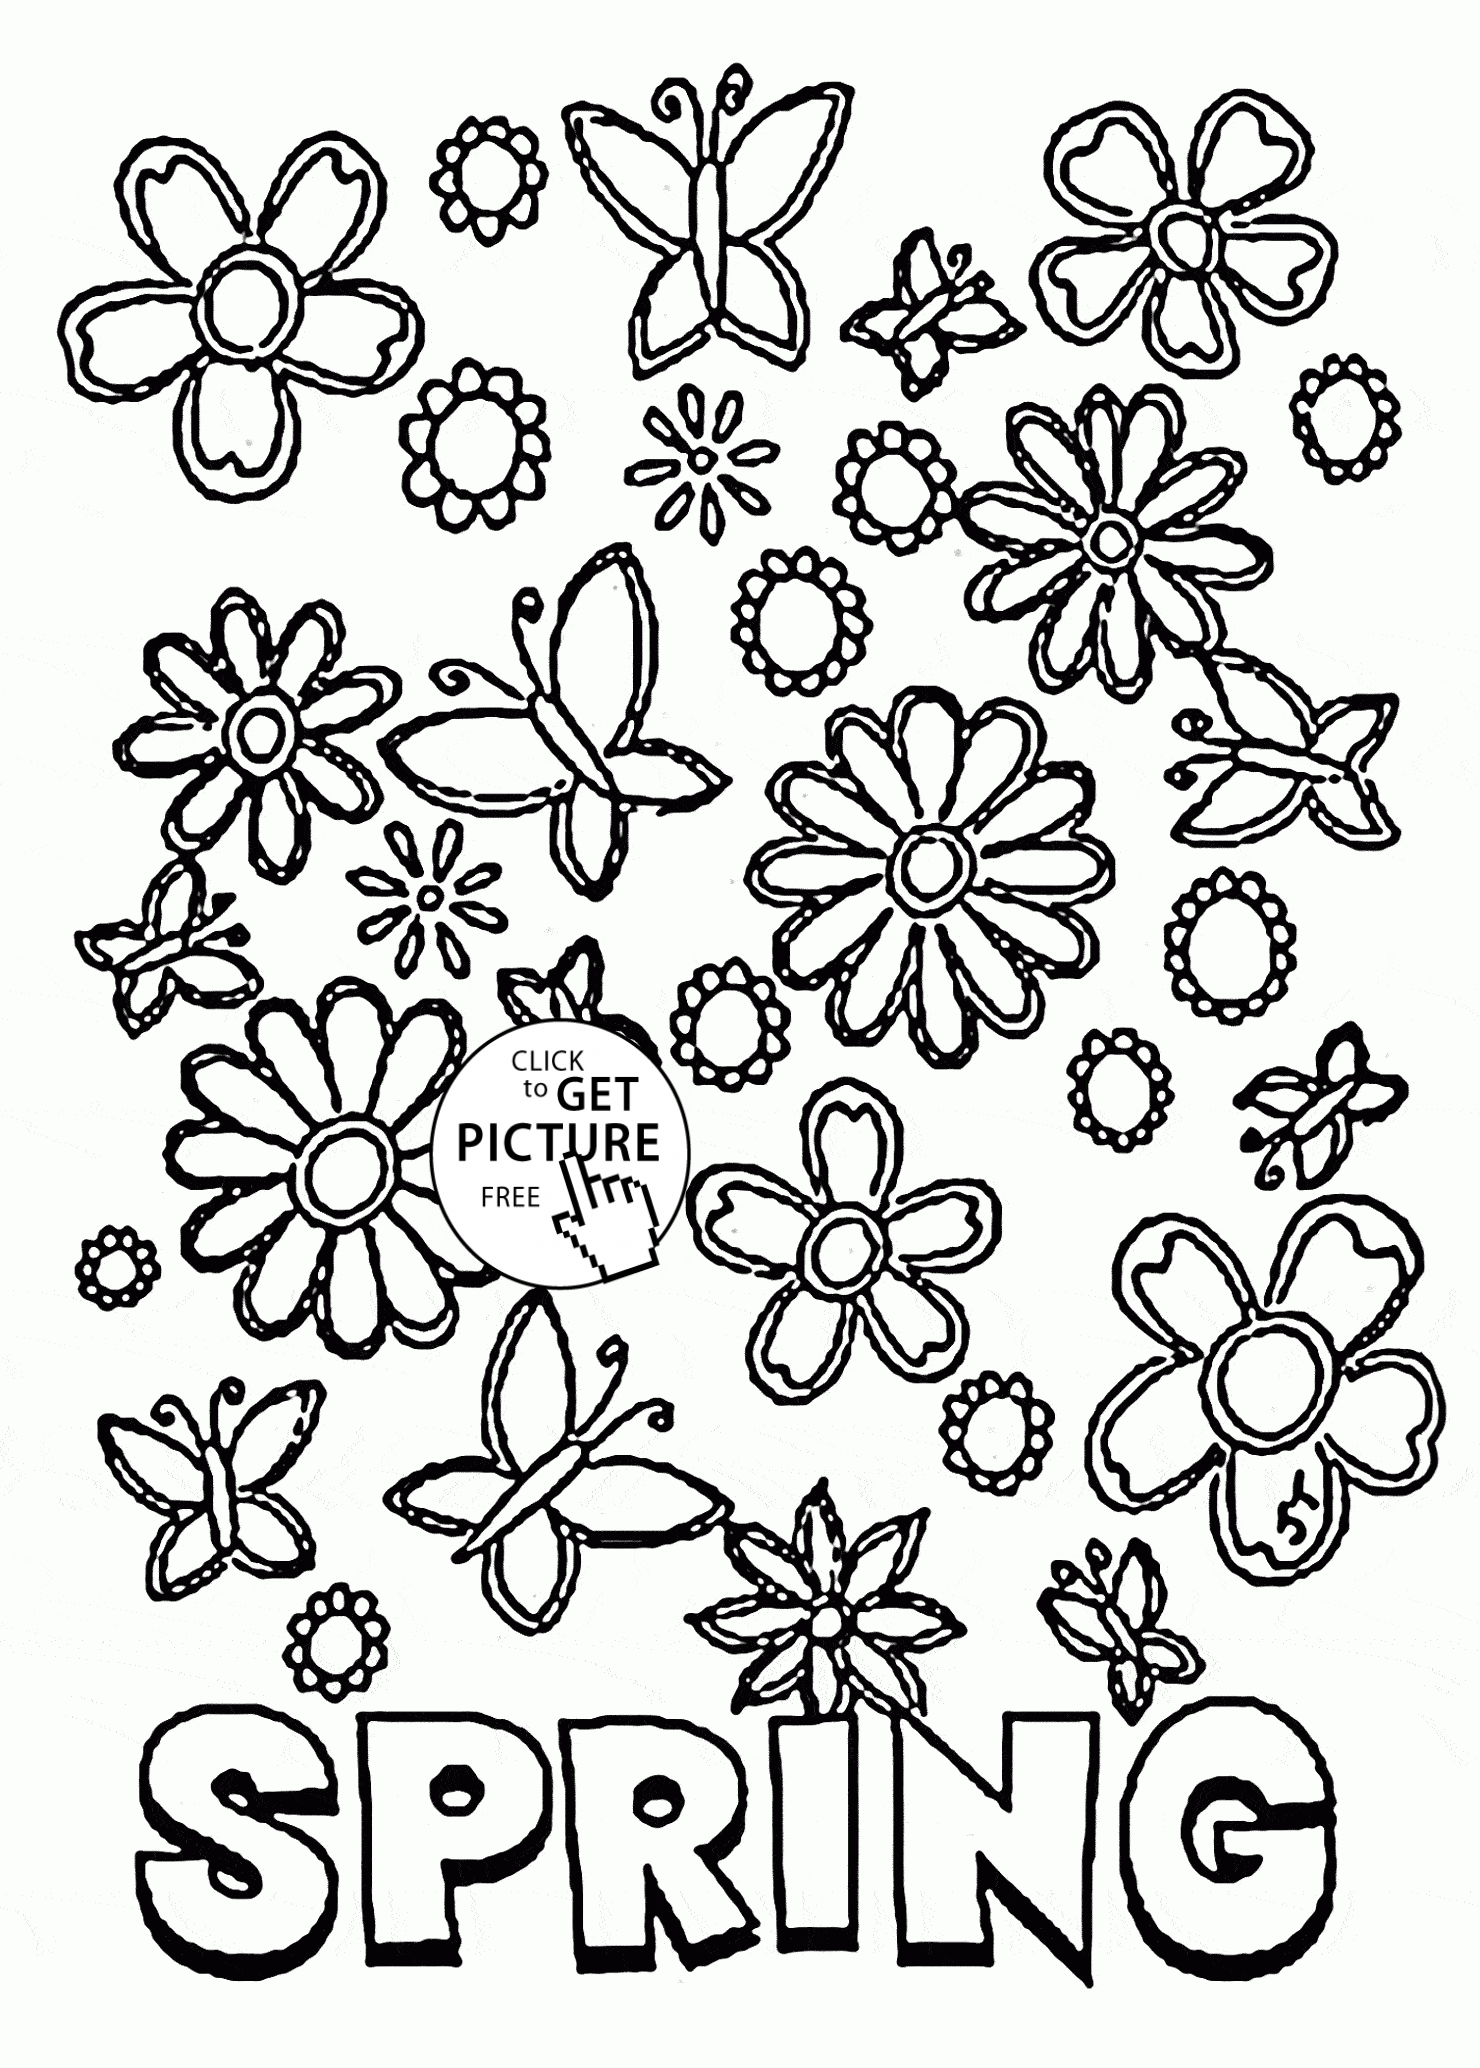 Many spring flowers coloring page for kids seasons coloring pages printables free